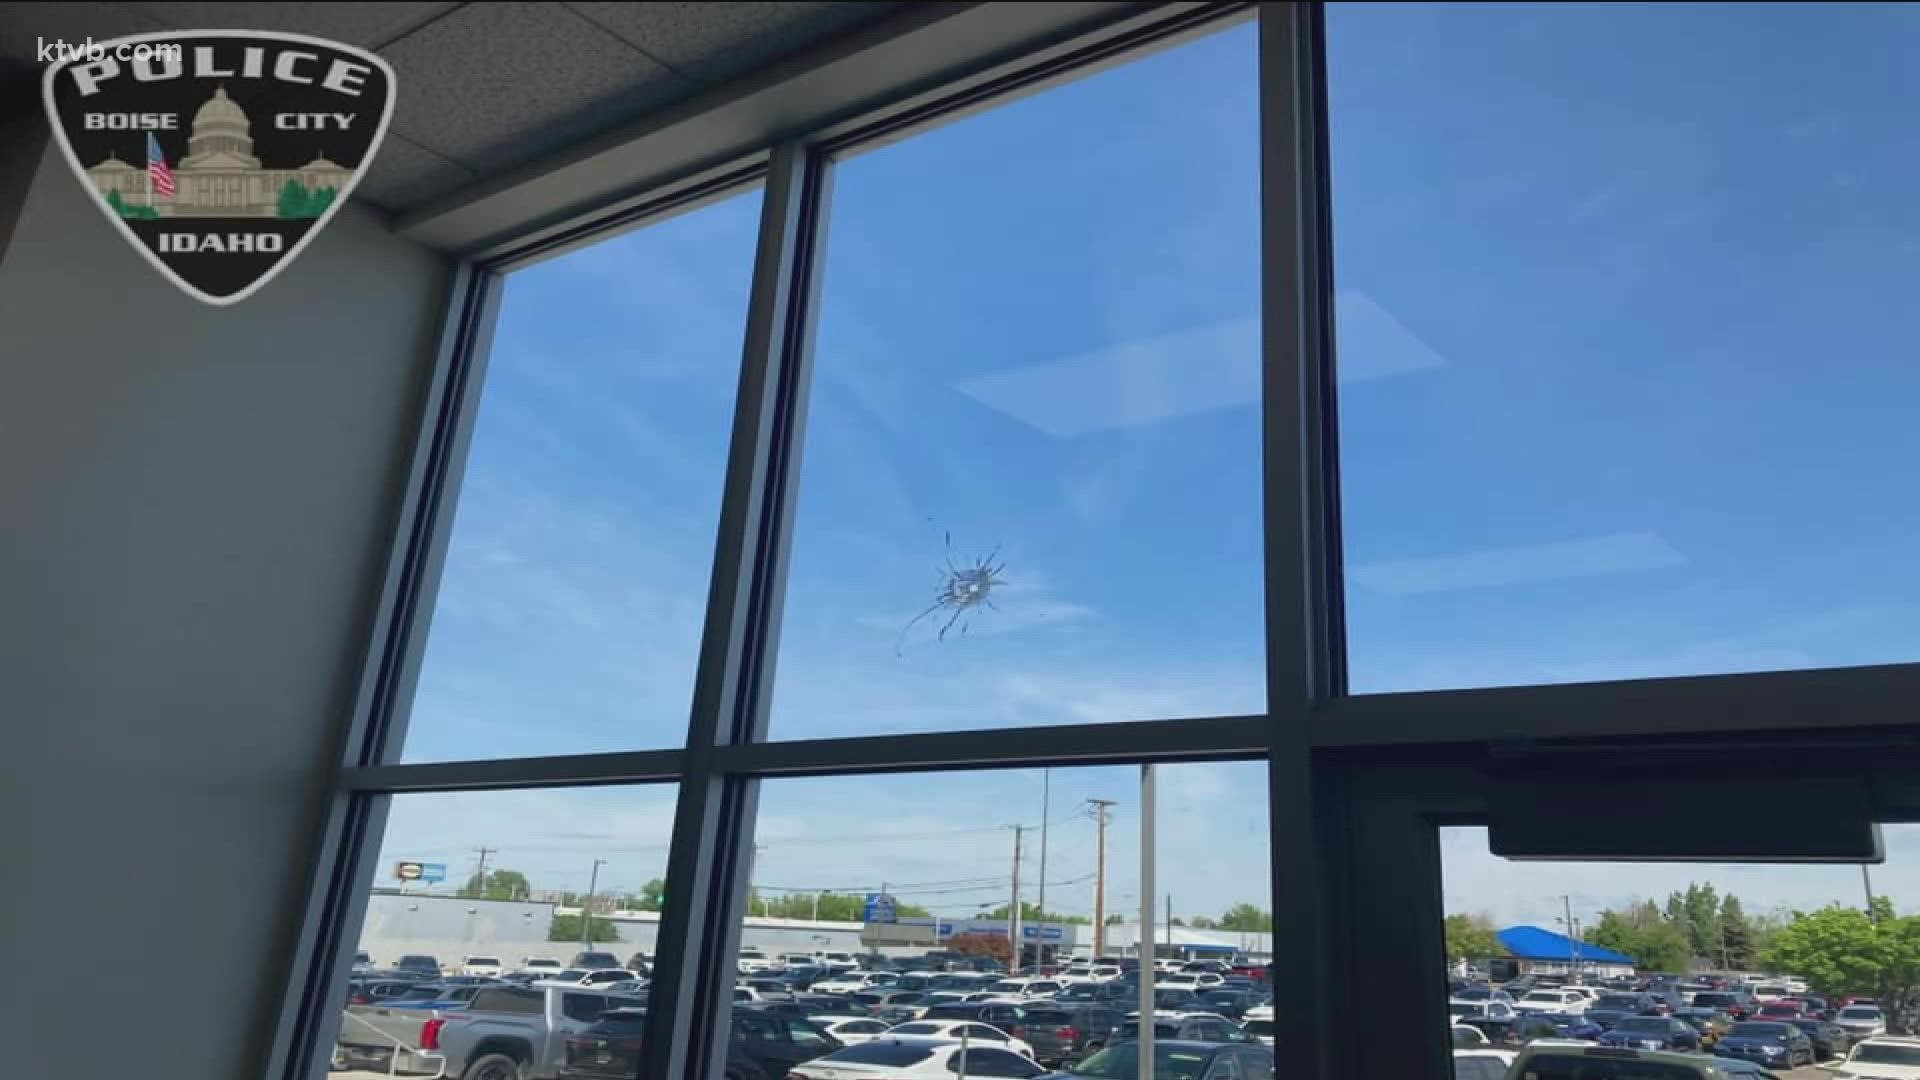 The Boise Police Department said the shot was fired around 3:45 a.m. on Sunday, May 15. The bullet hit a wall inside the business after going through the window.